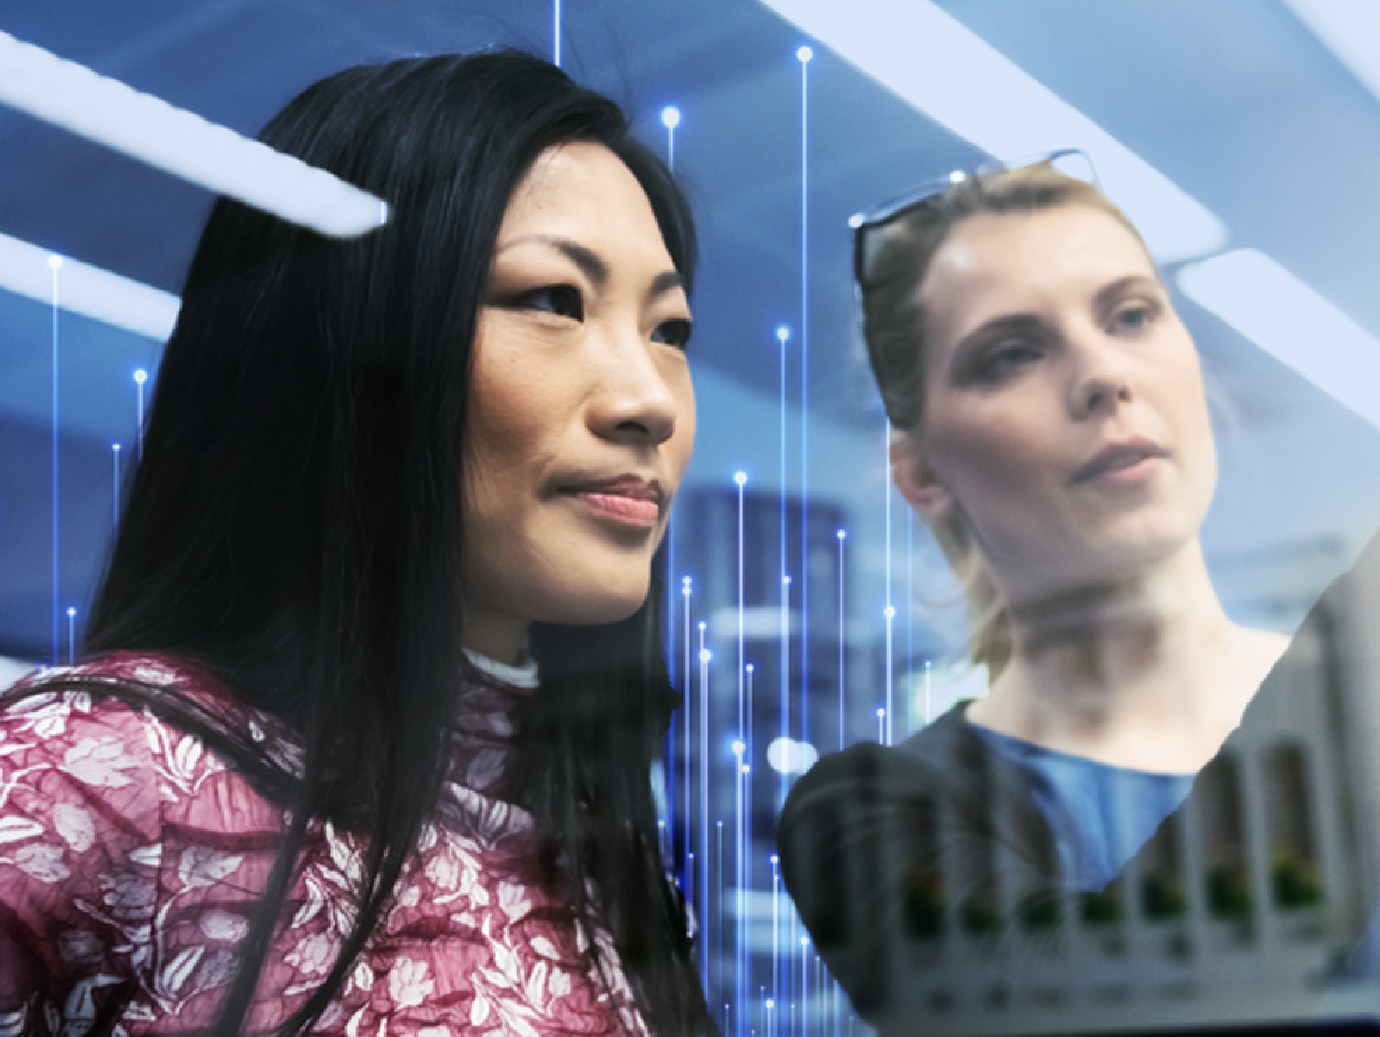 Two women looking into the distance as one of them points at something, overlaid with OpenBlue graphics